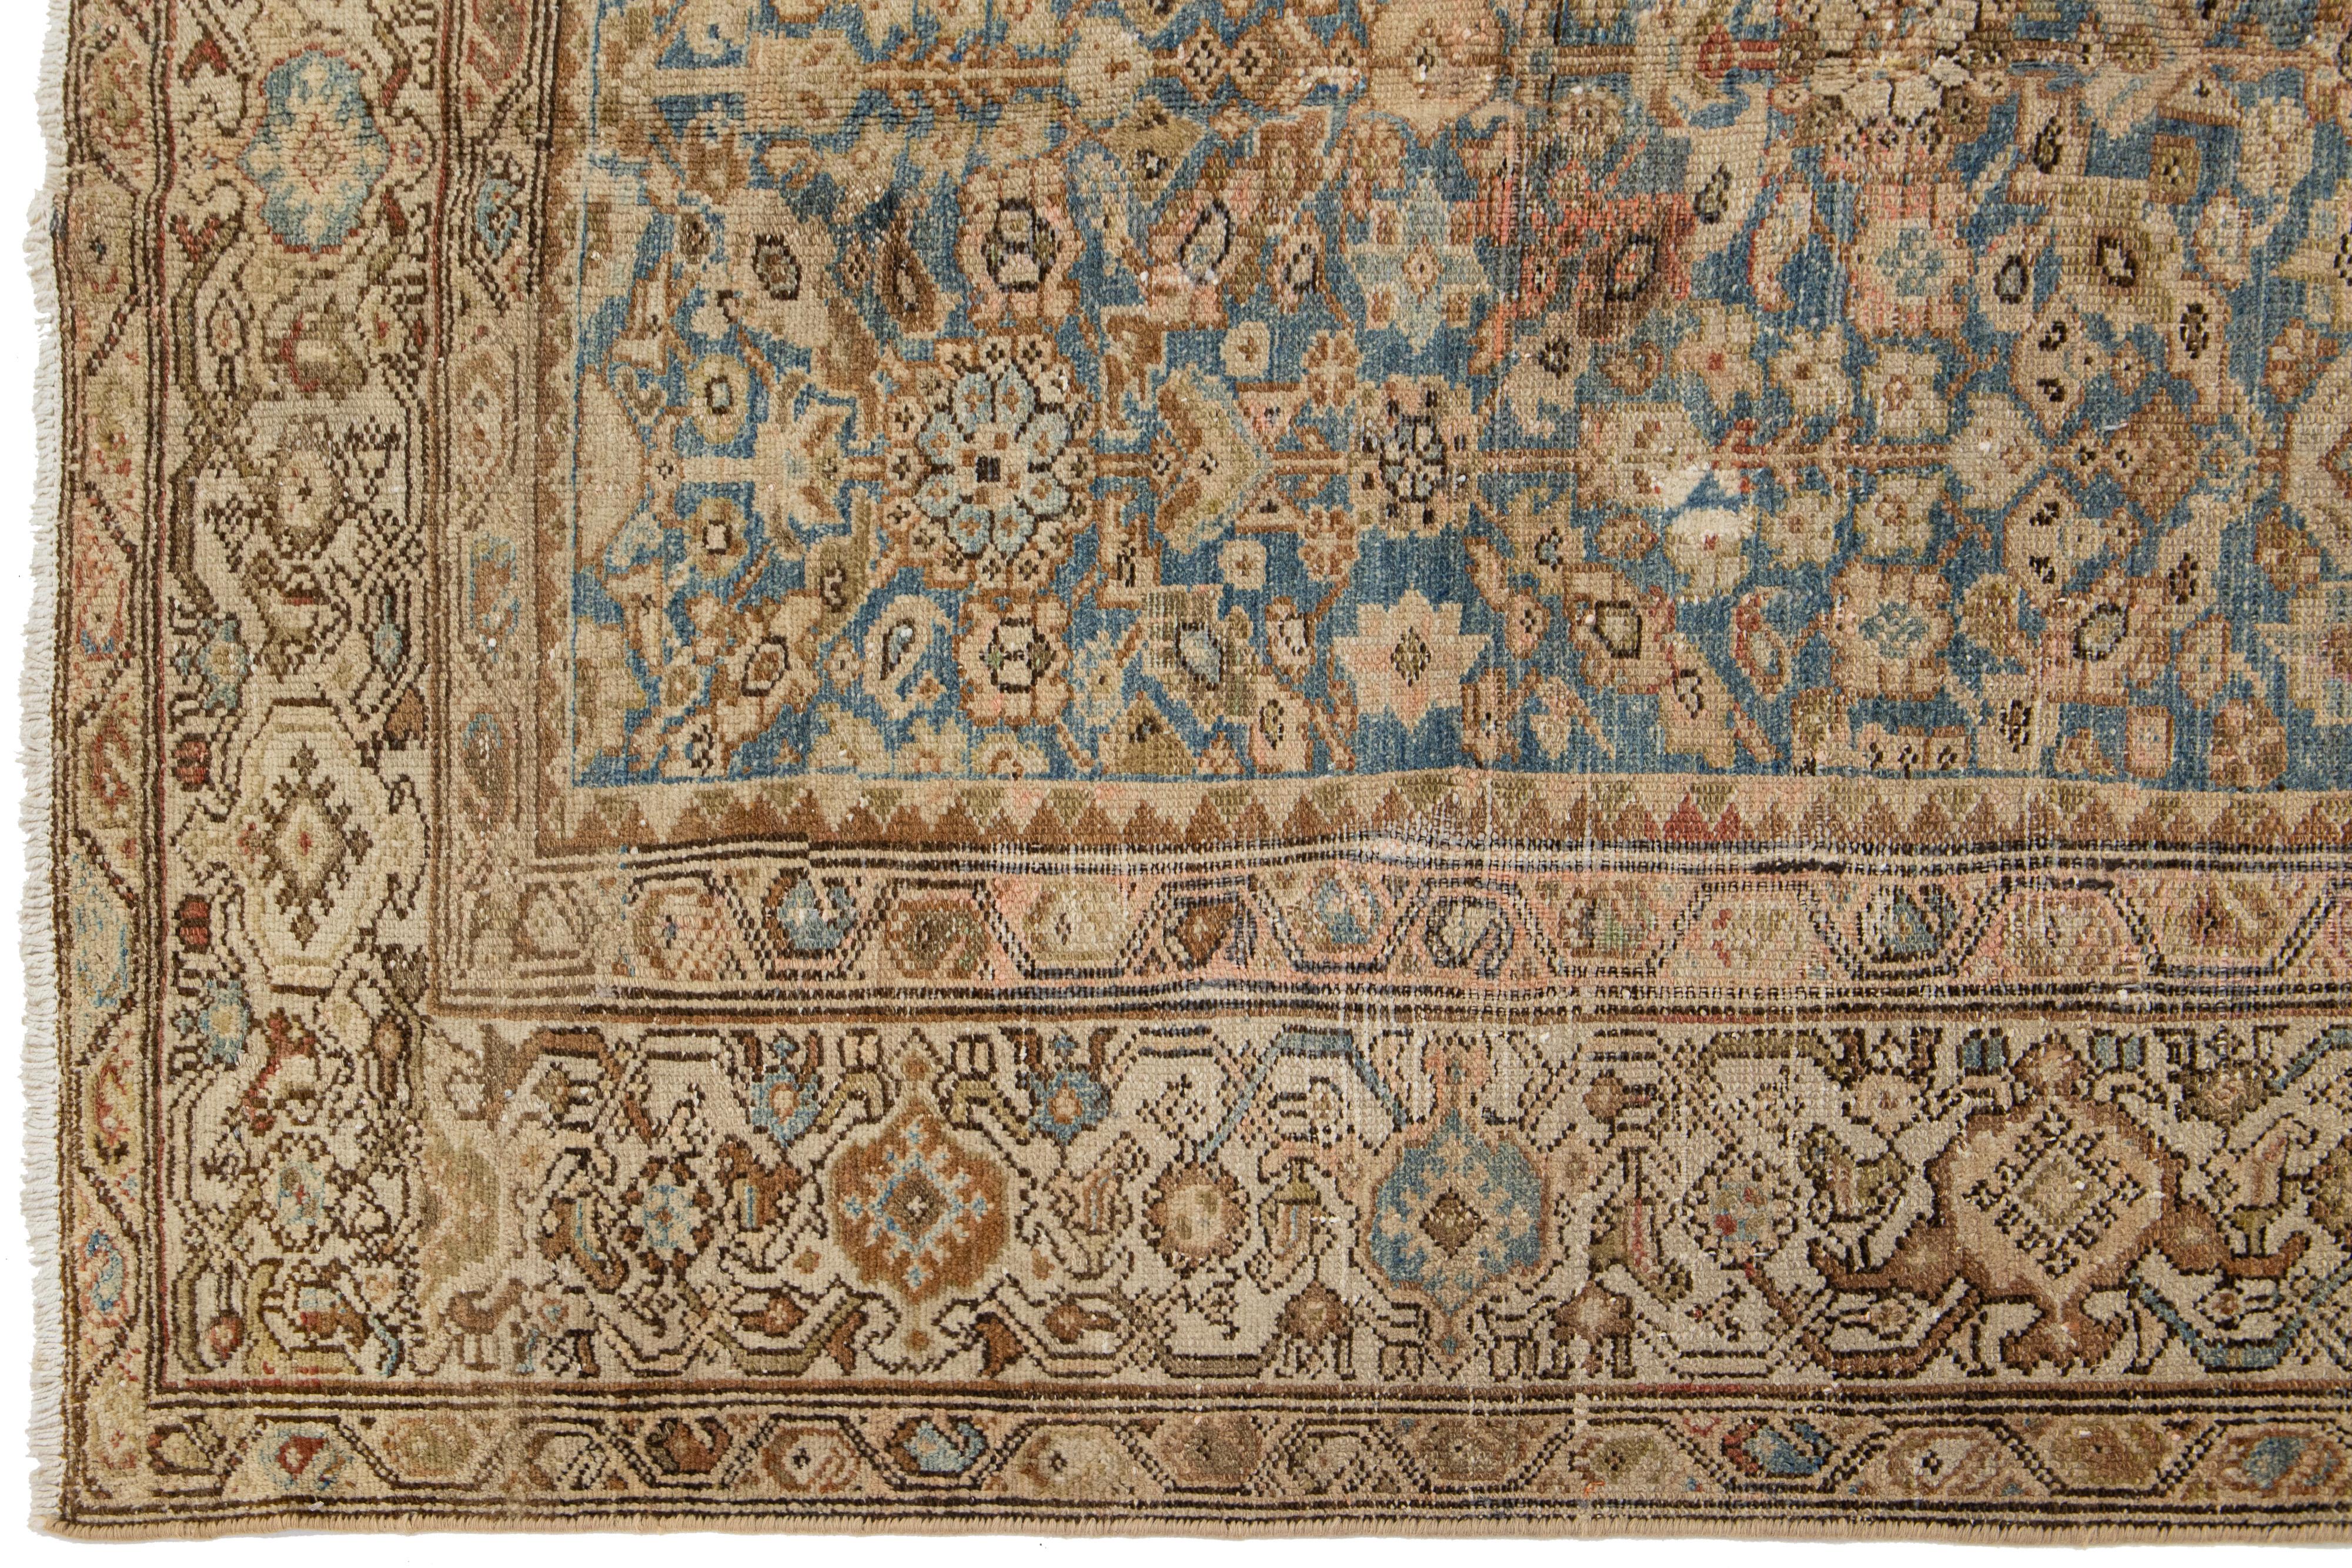 Early 20th Century Blue Persian Malayer Wool Rug From the 1910s with Allover Floral Design For Sale